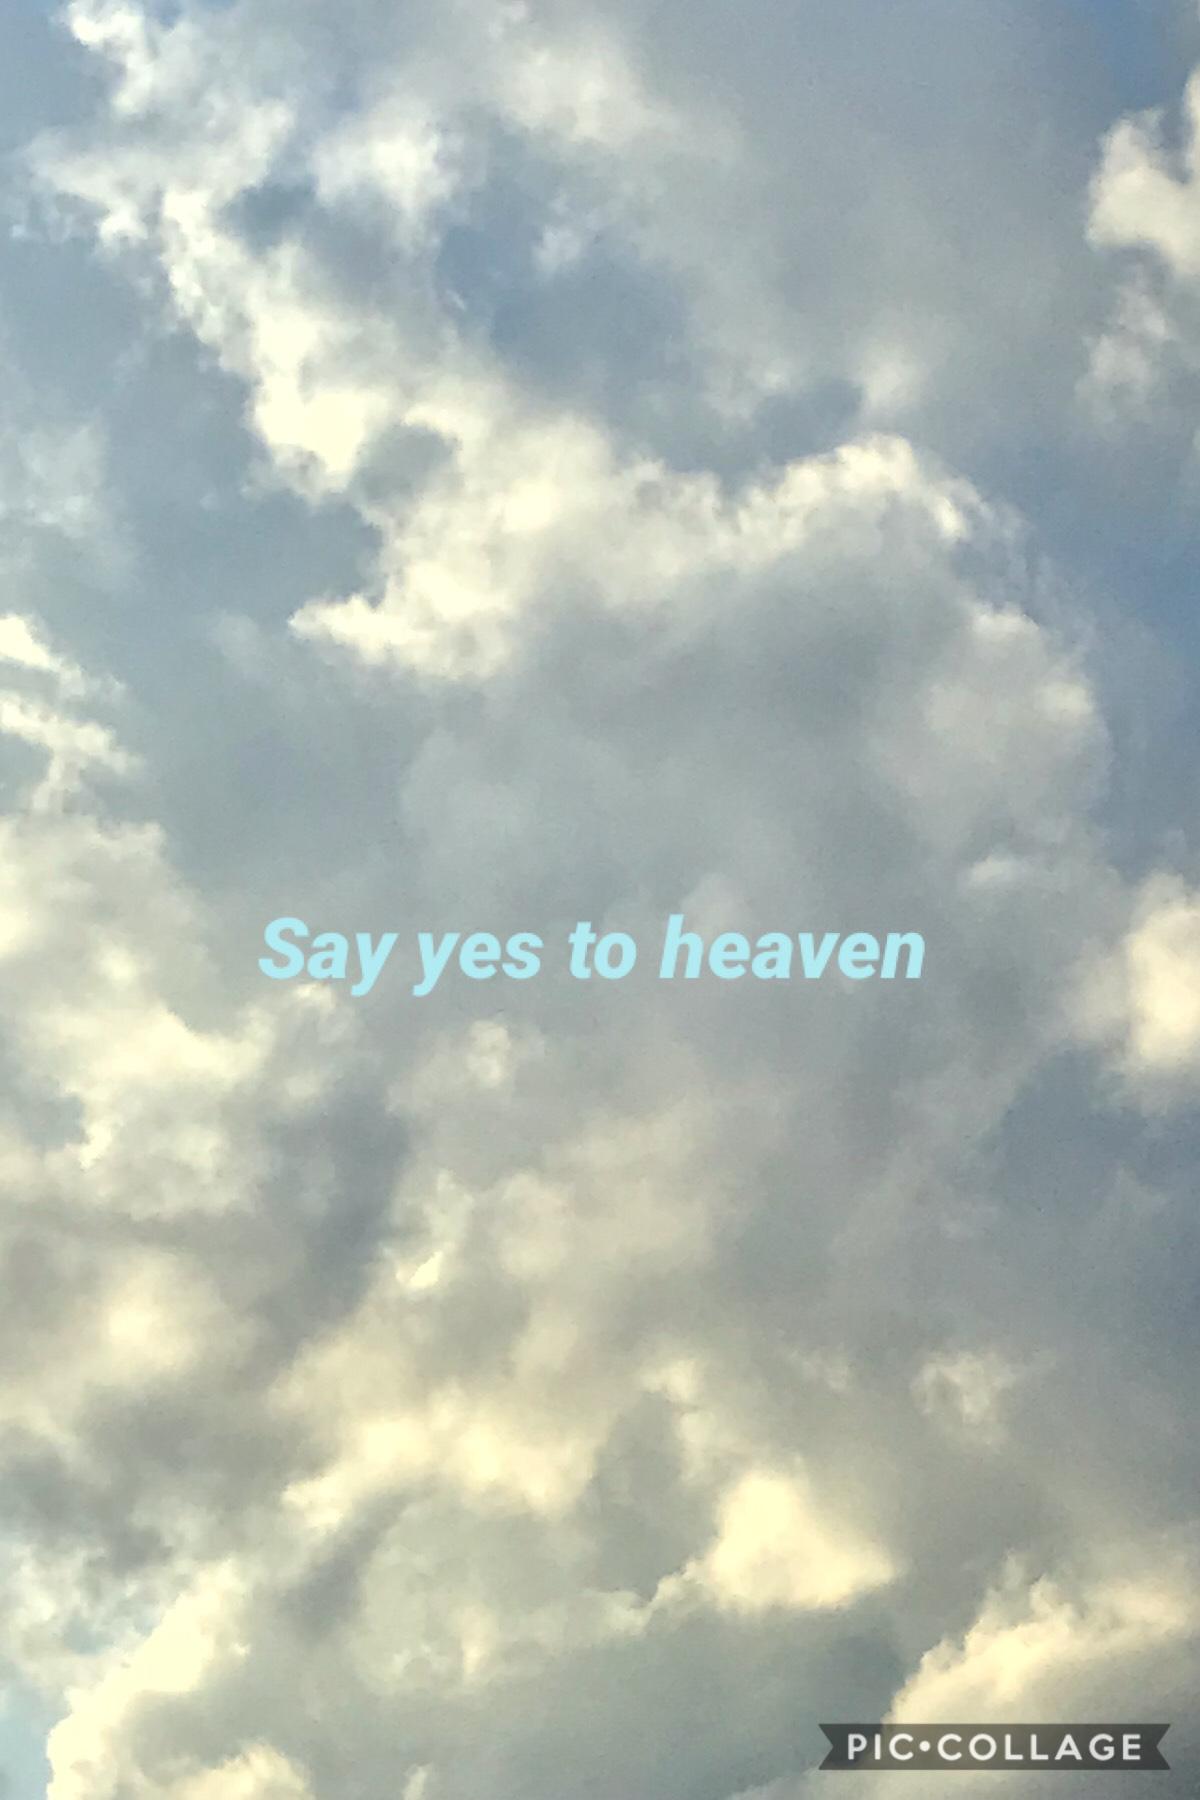 “Say yes to heaven” - Lana Del Rey